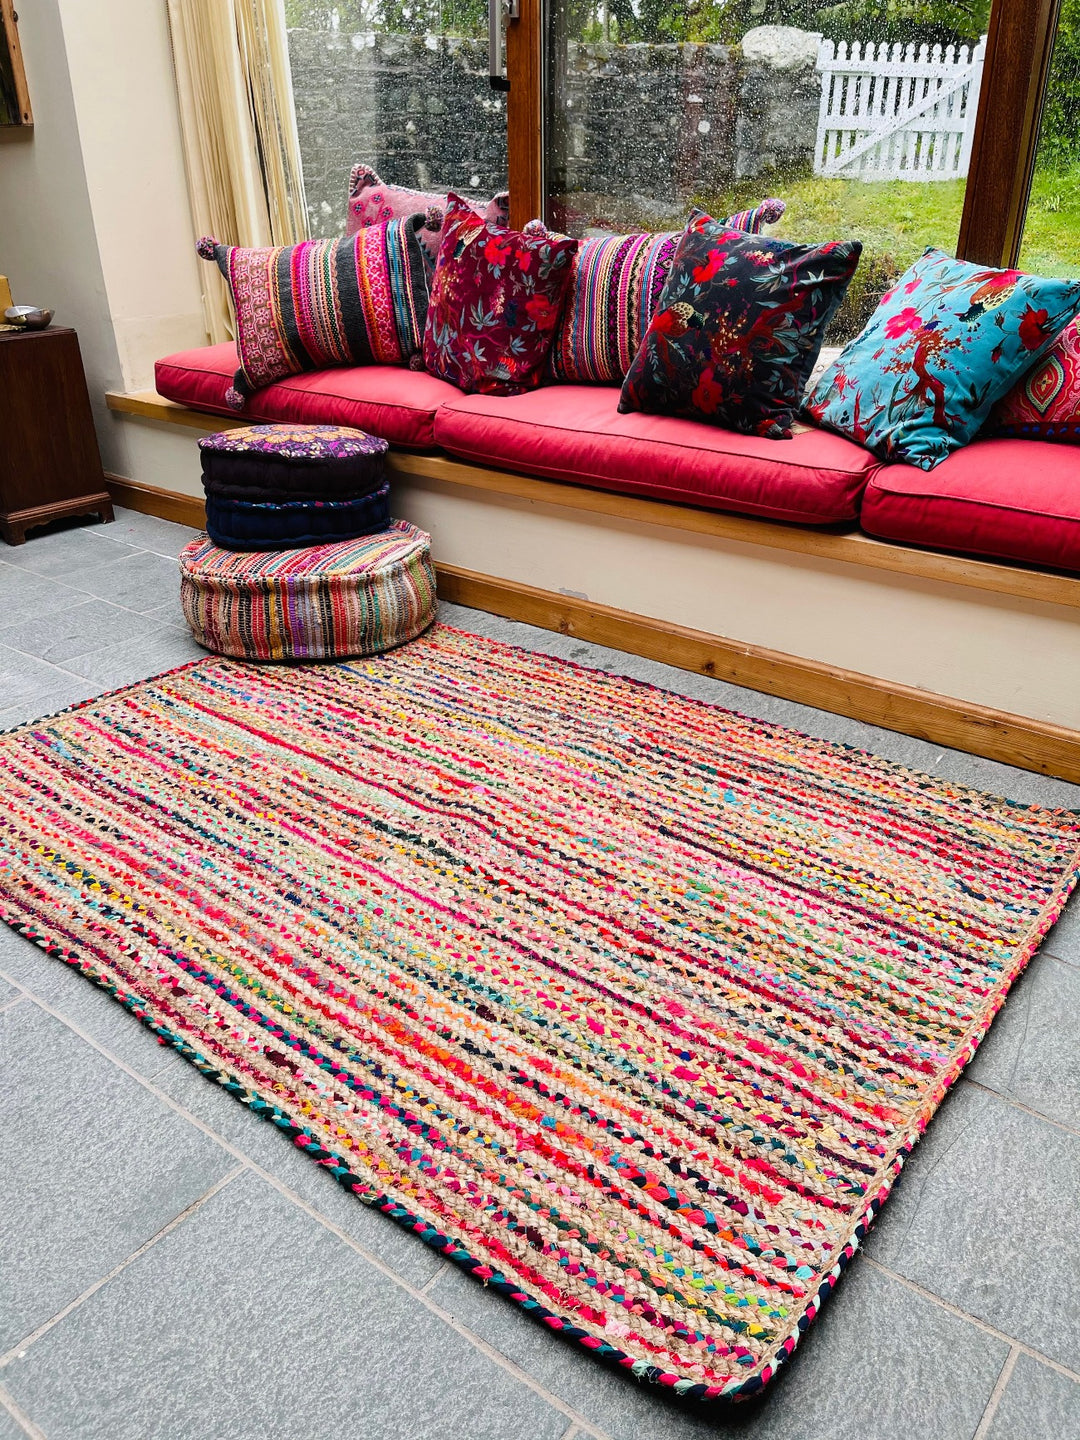 MISHRAN Rectangular Jute Area Rug Hand Woven with Recycled Fabric